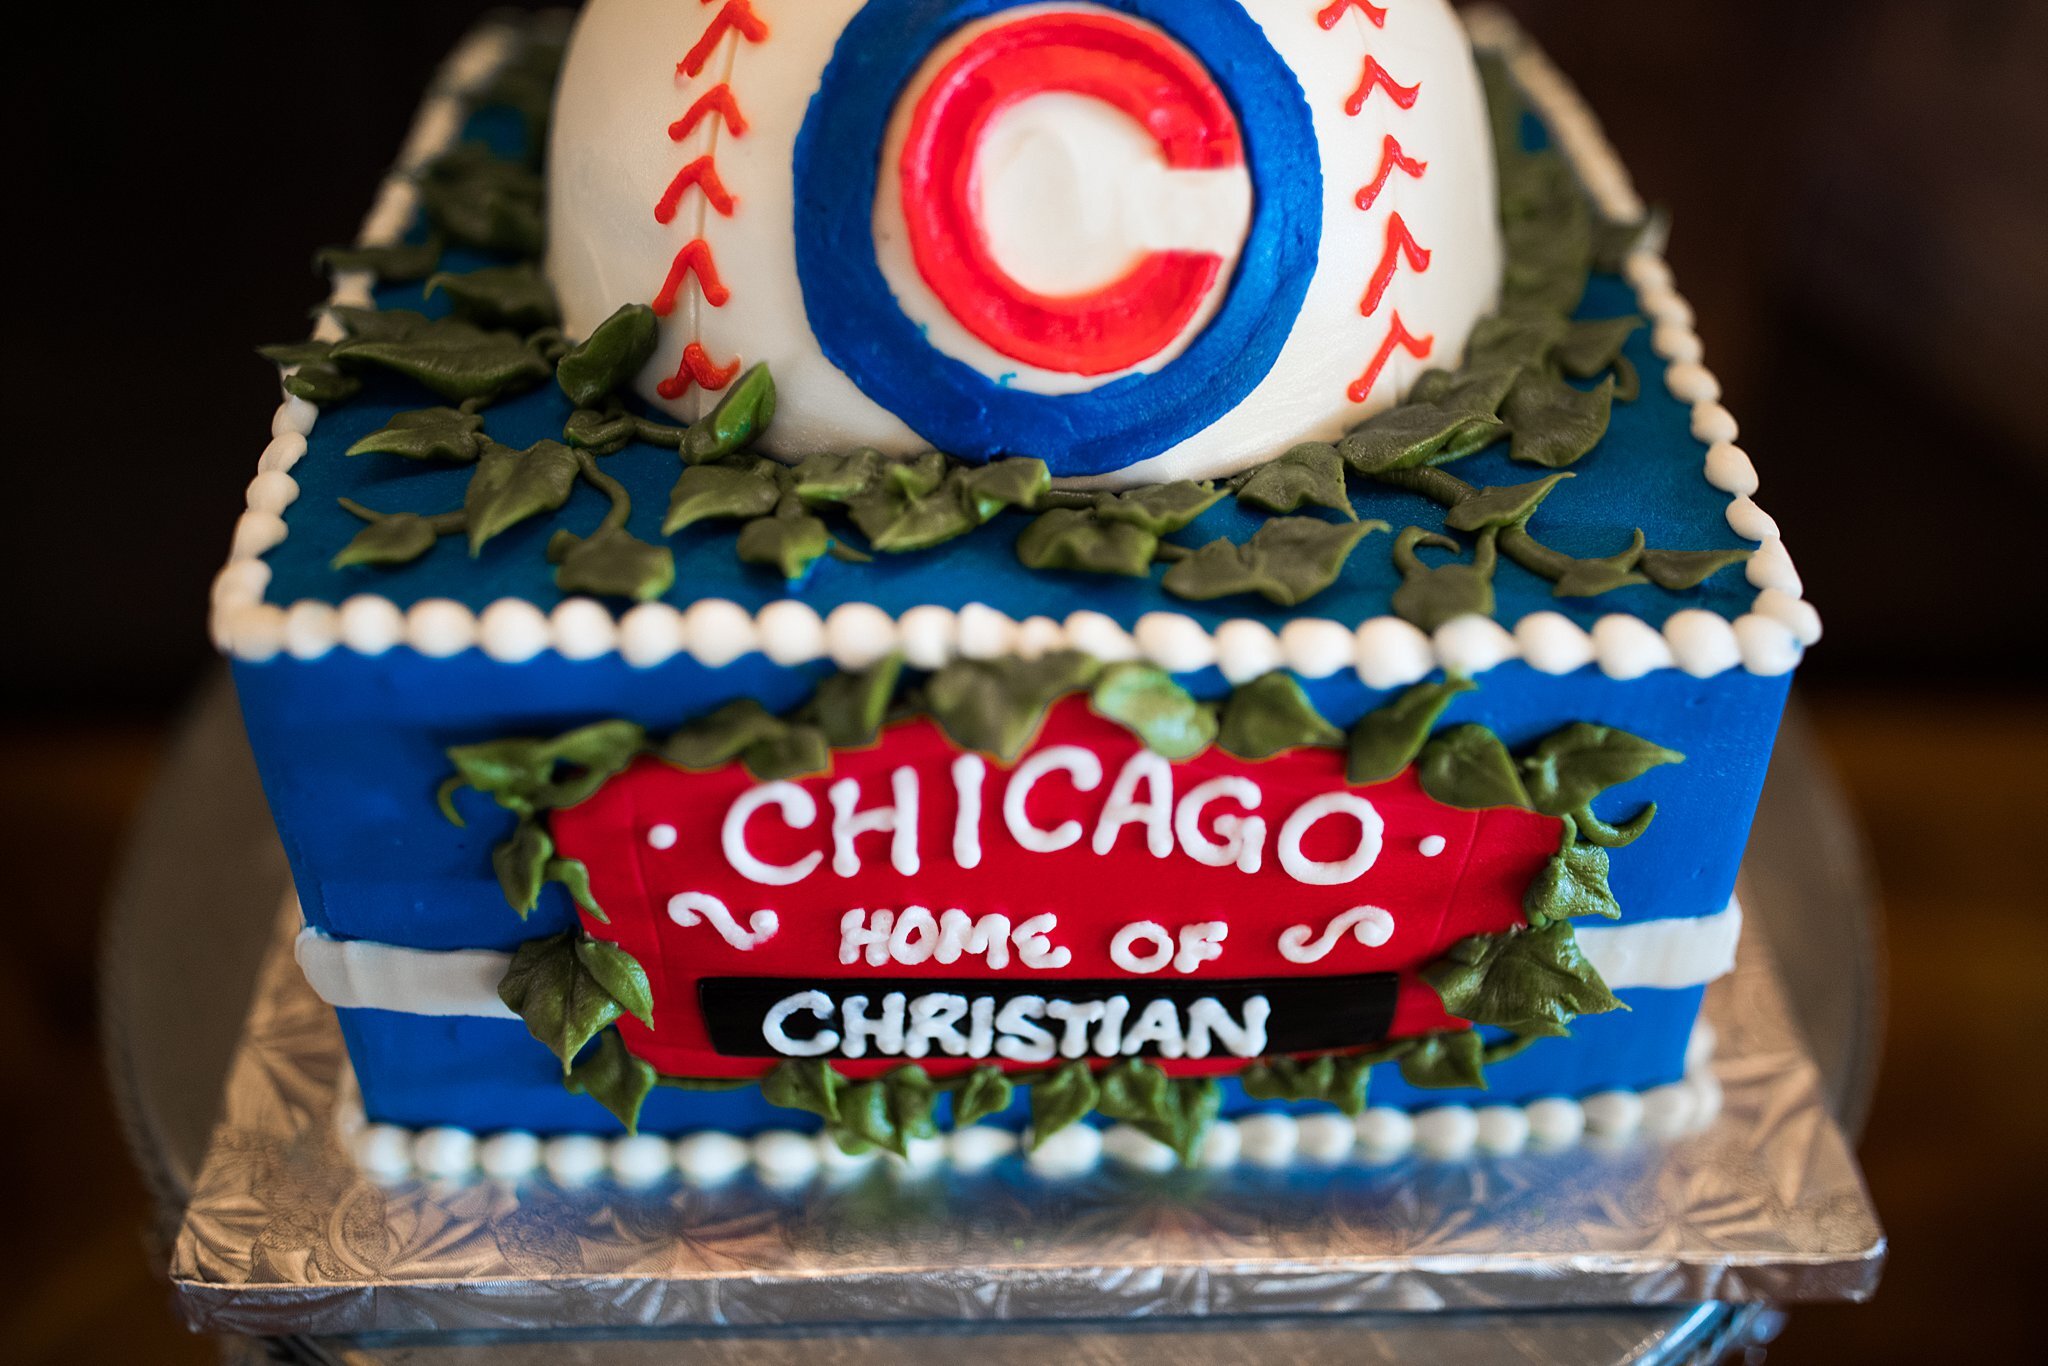  Chicago Cubs wedding cake from Daube’s Cakes and Bakery. 